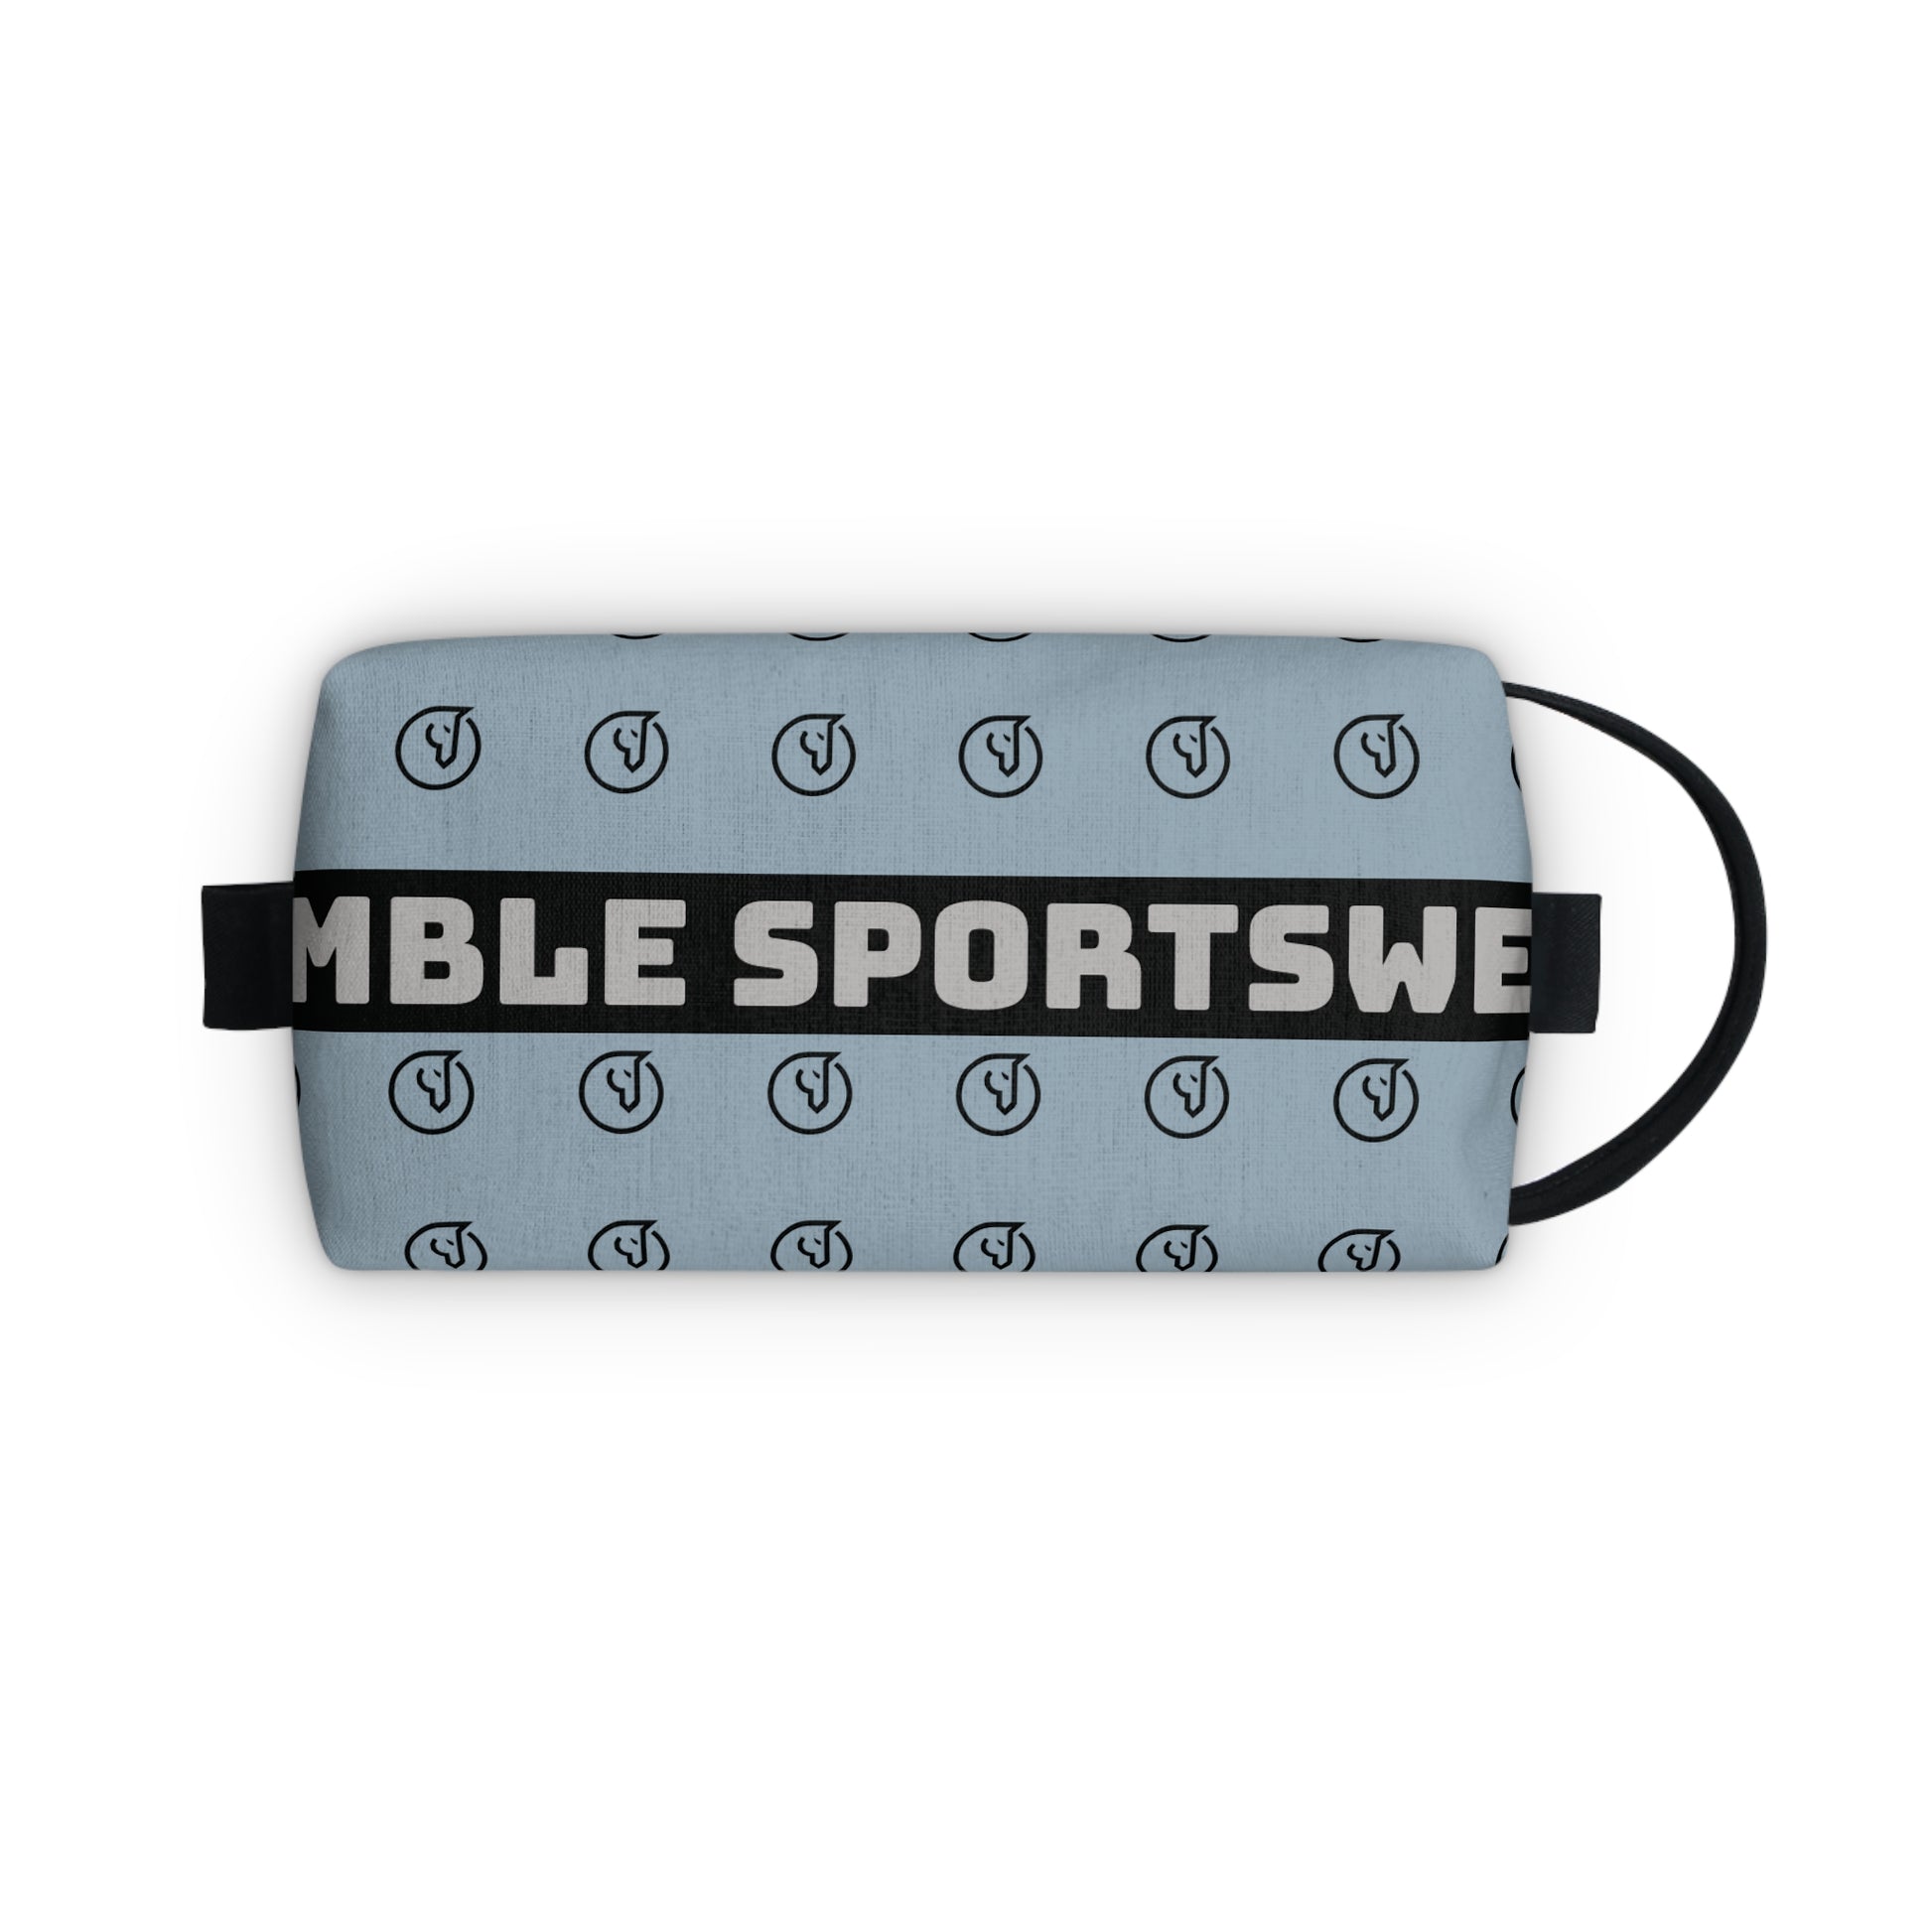 Humble Sportswear, personal use travel pouch, toiletry bags, cosmetic bags, ditty bags